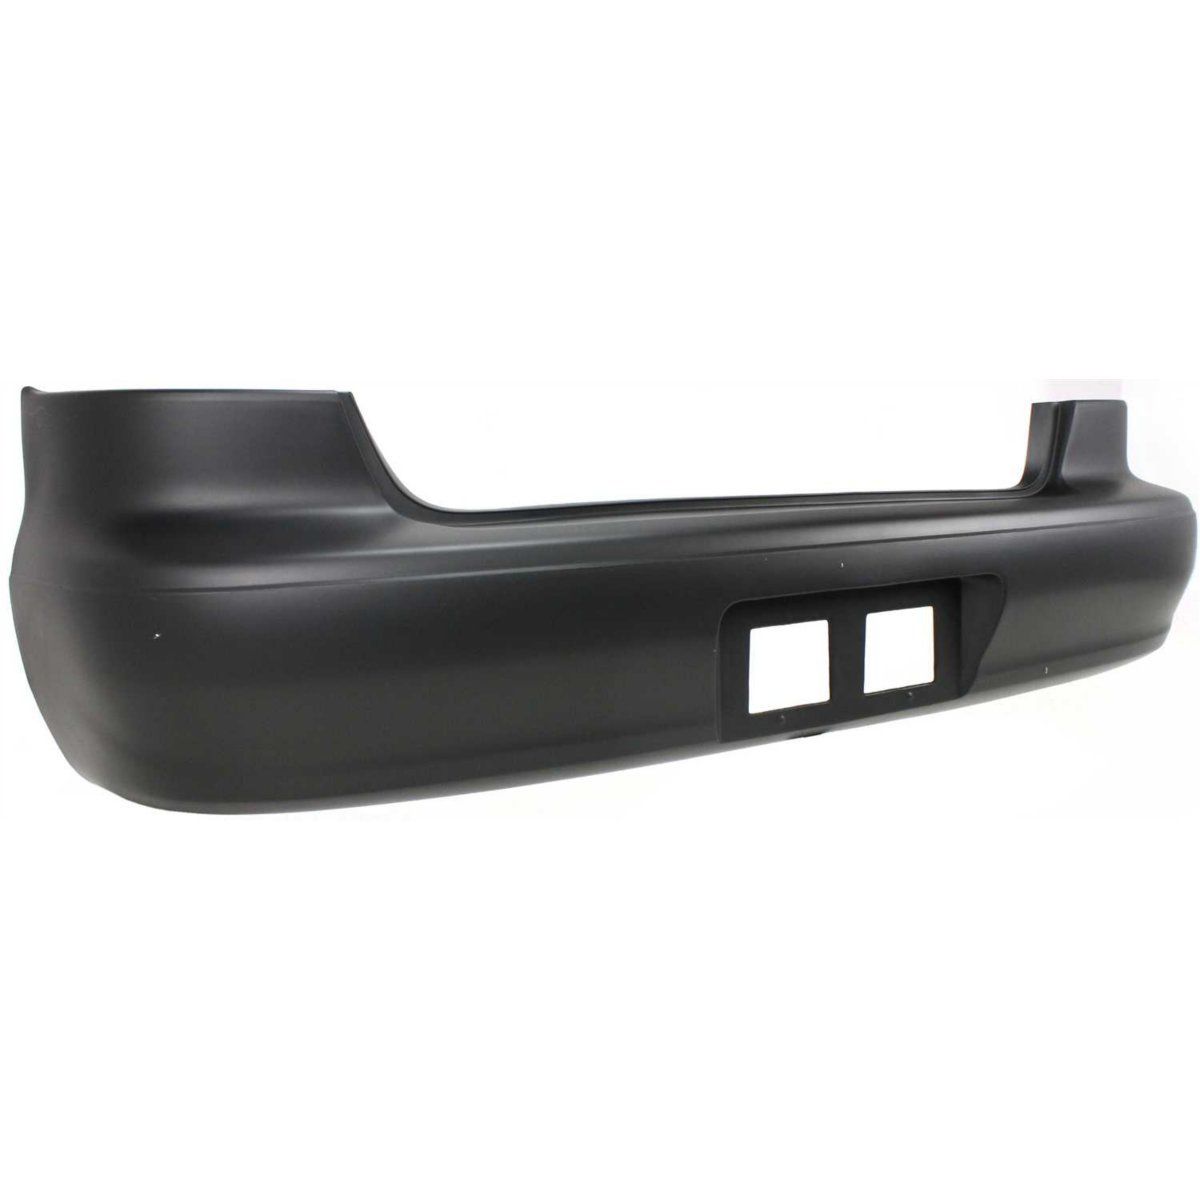 1998-2002 TOYOTA COROLLA Rear Bumper Cover Painted to Match